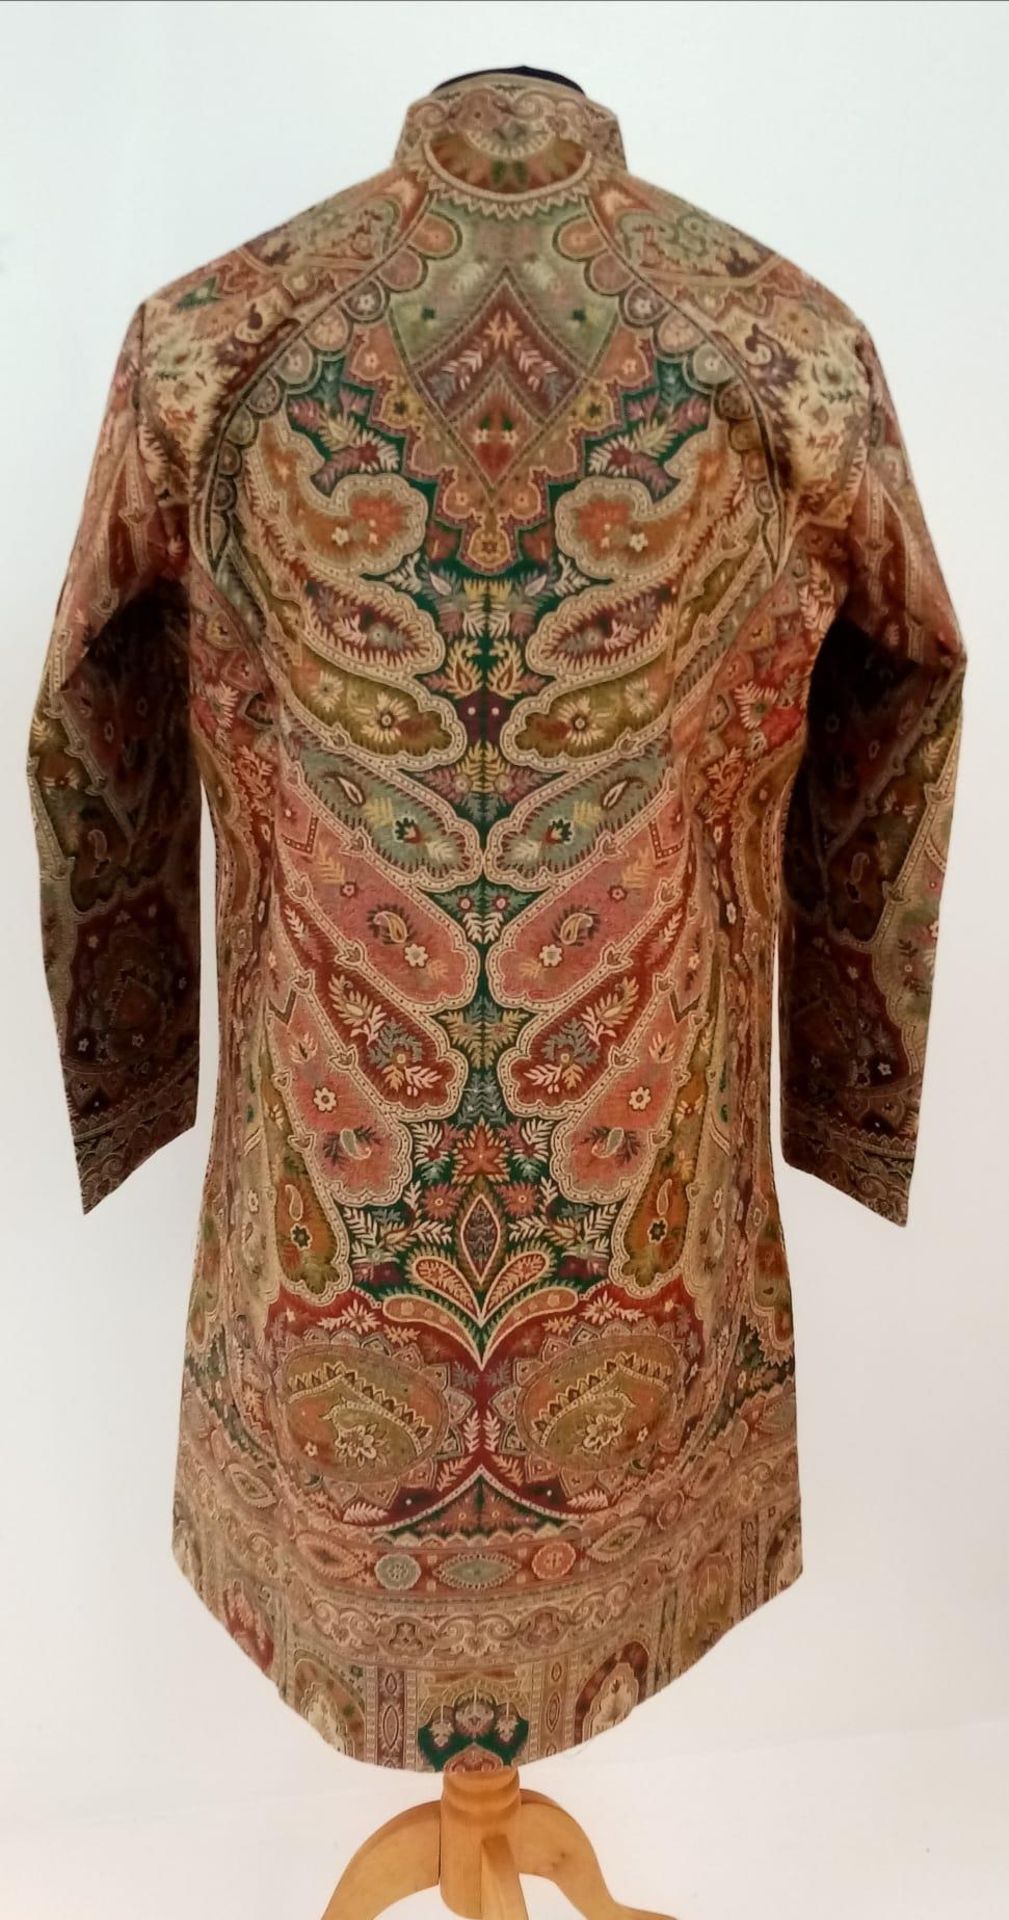 An Indian Paisley Jacket - Size 44. Good condition. - Image 2 of 4